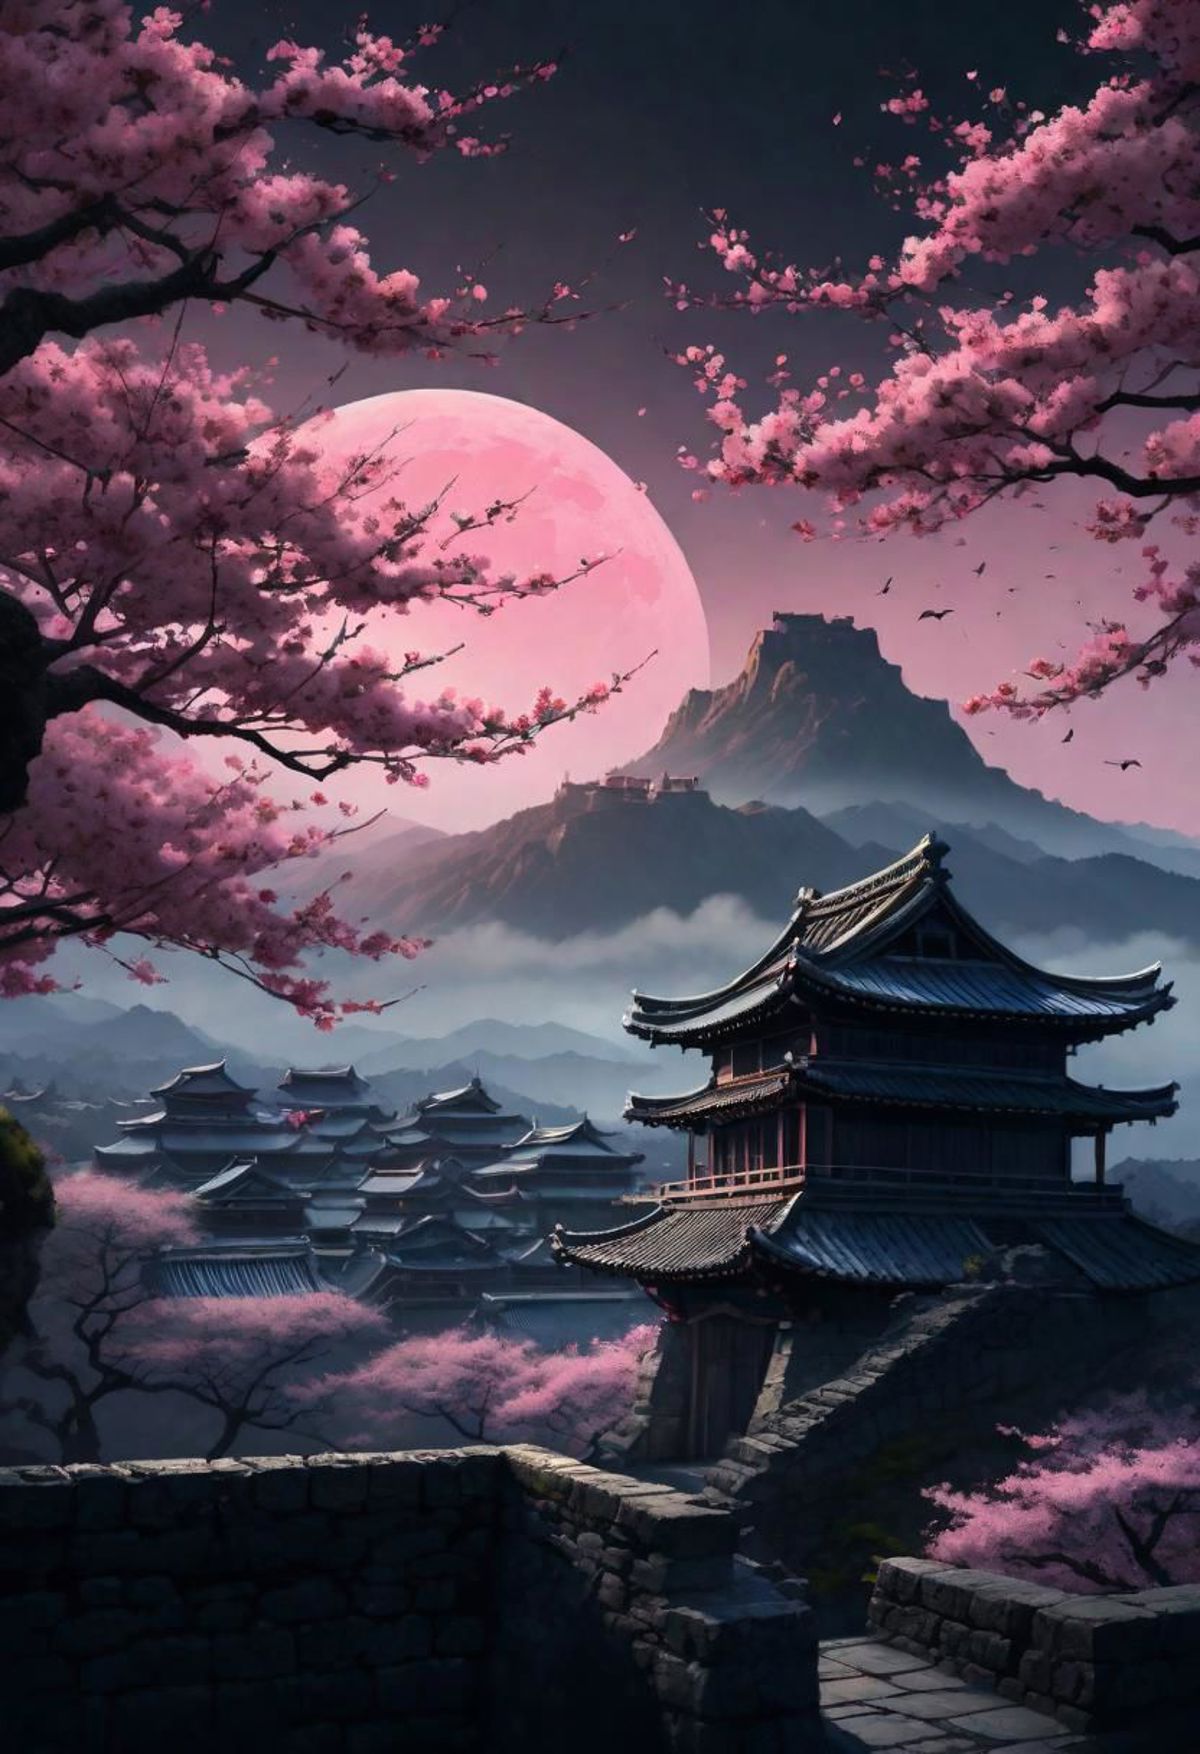 A painting of a Chinese palace with a moon in the background.